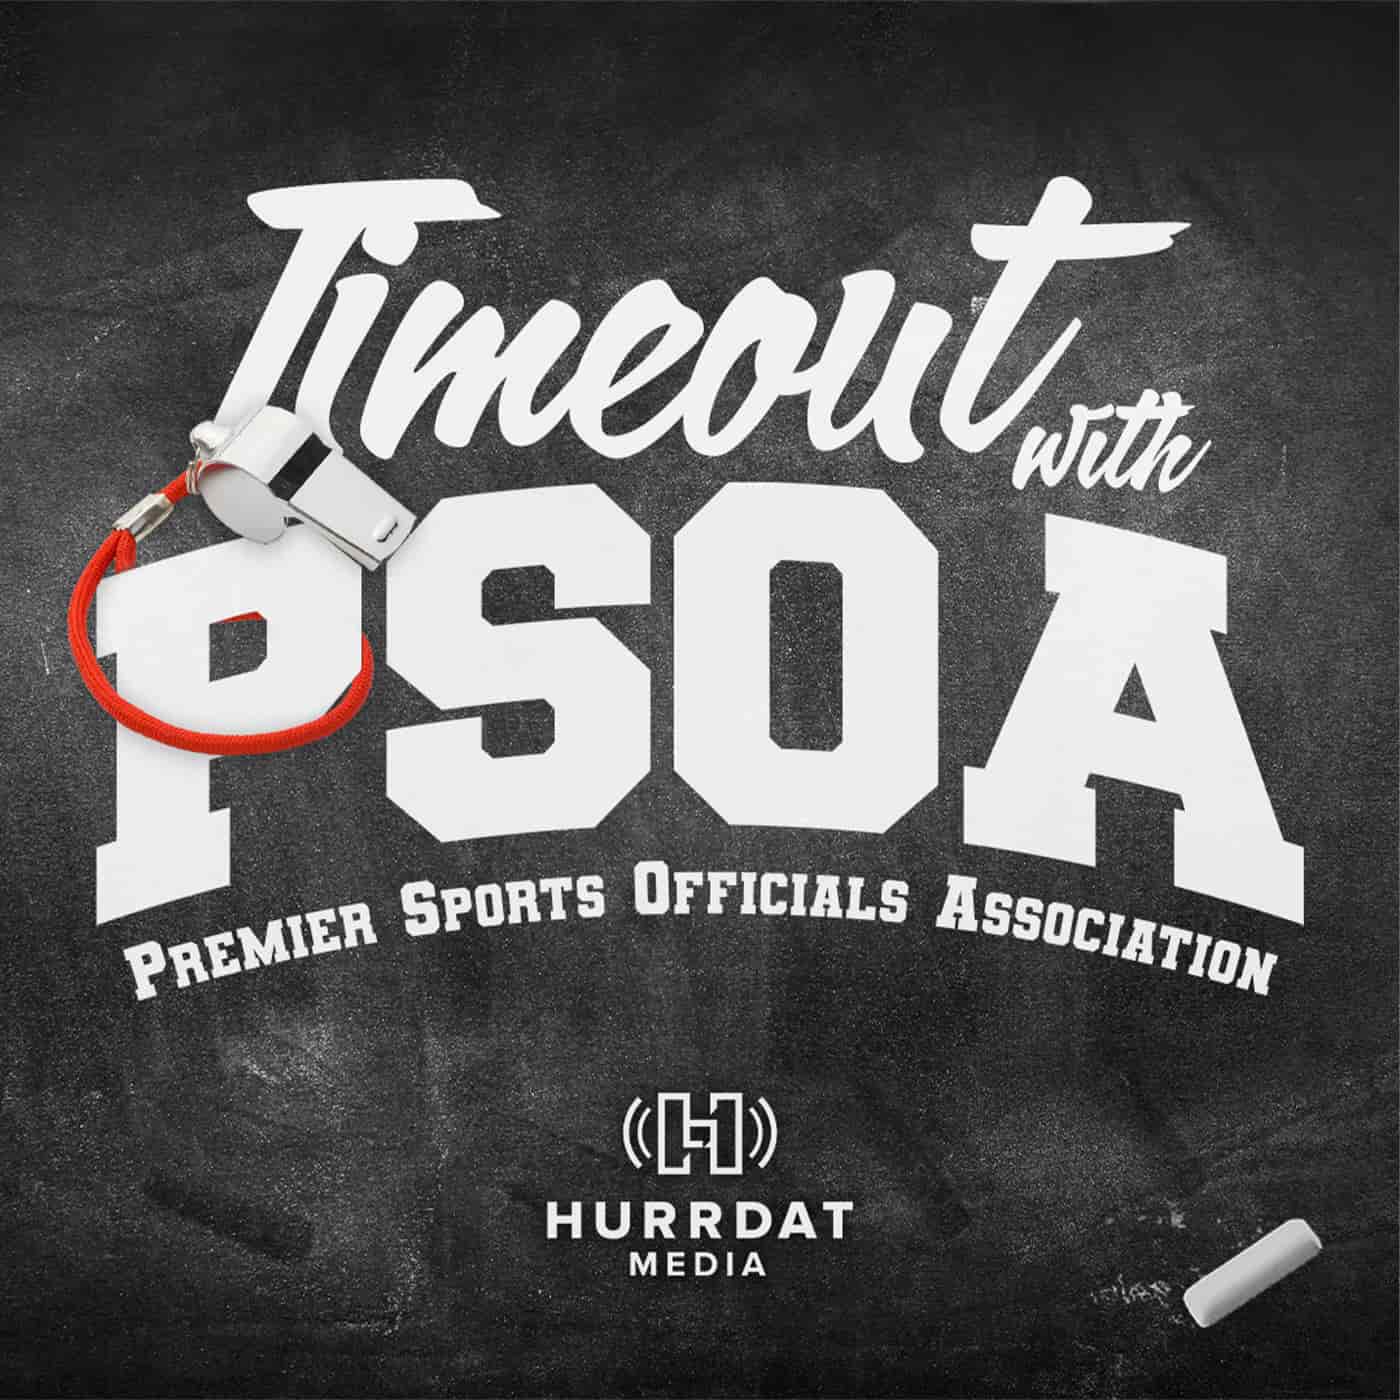 Timeout with PSOA